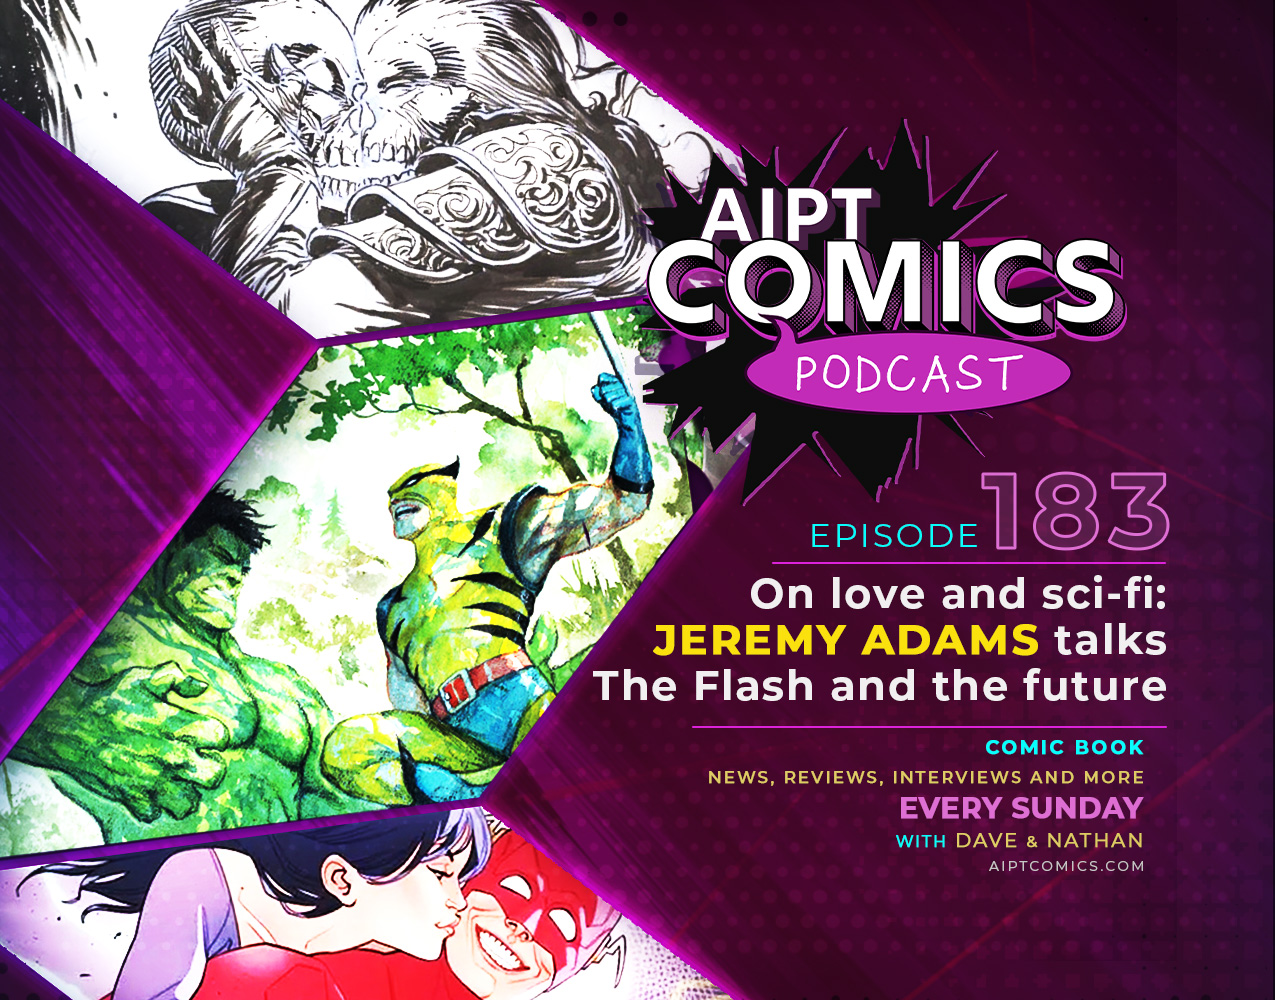 AIPT Comics Podcast Episode 183: On love and sci-fi: Jeremy Adams talks 'The Flash' and the future